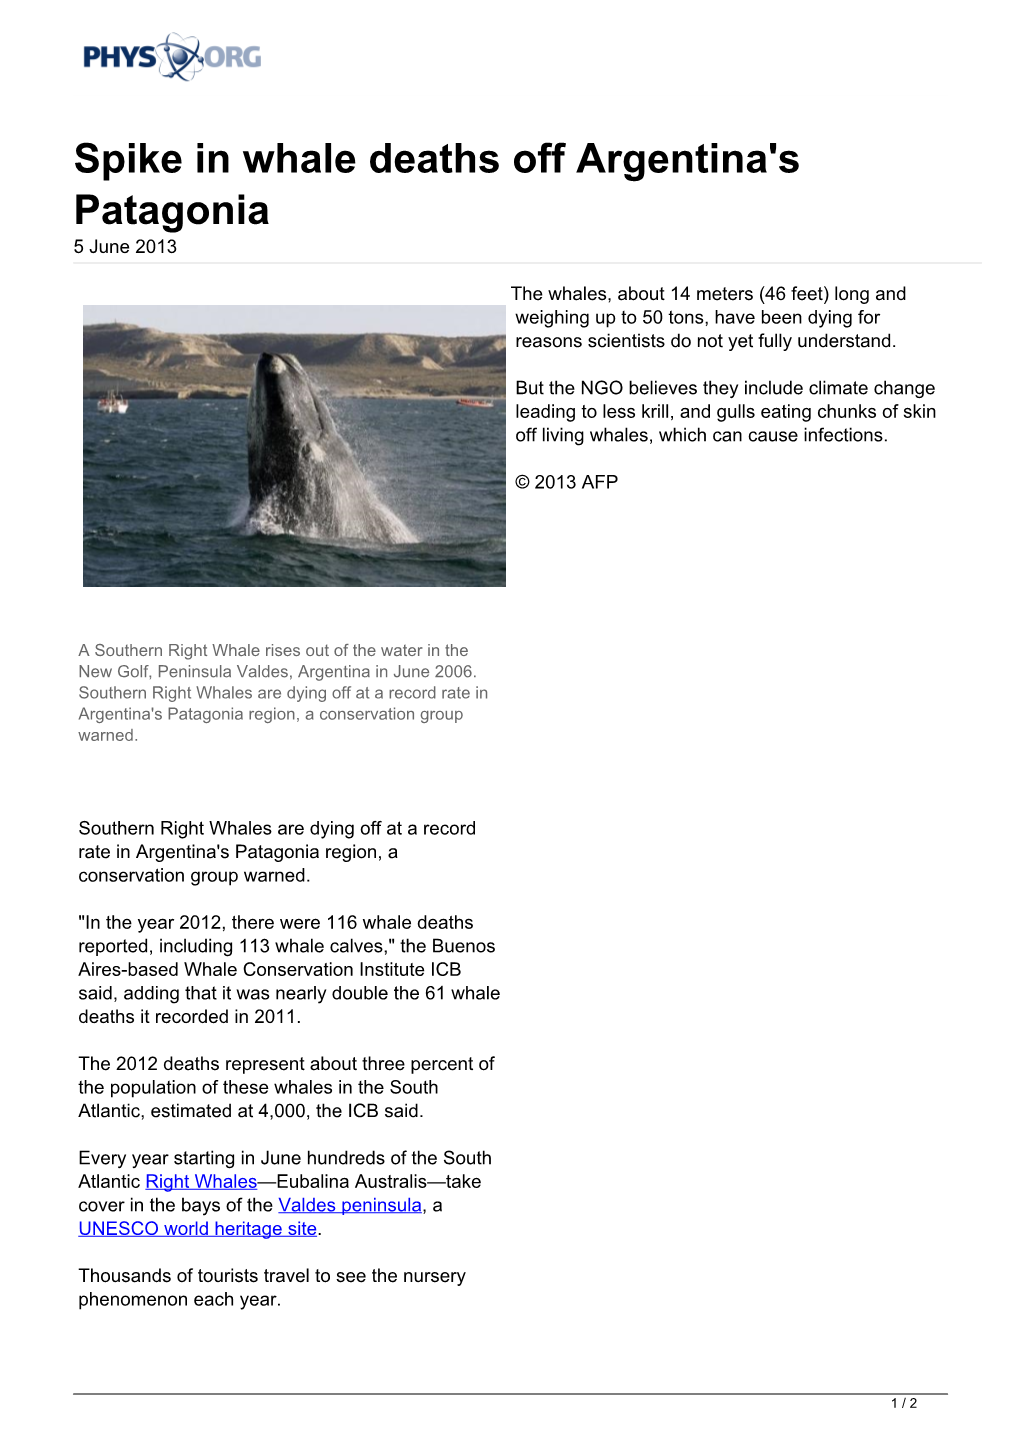 Spike in Whale Deaths Off Argentina's Patagonia 5 June 2013